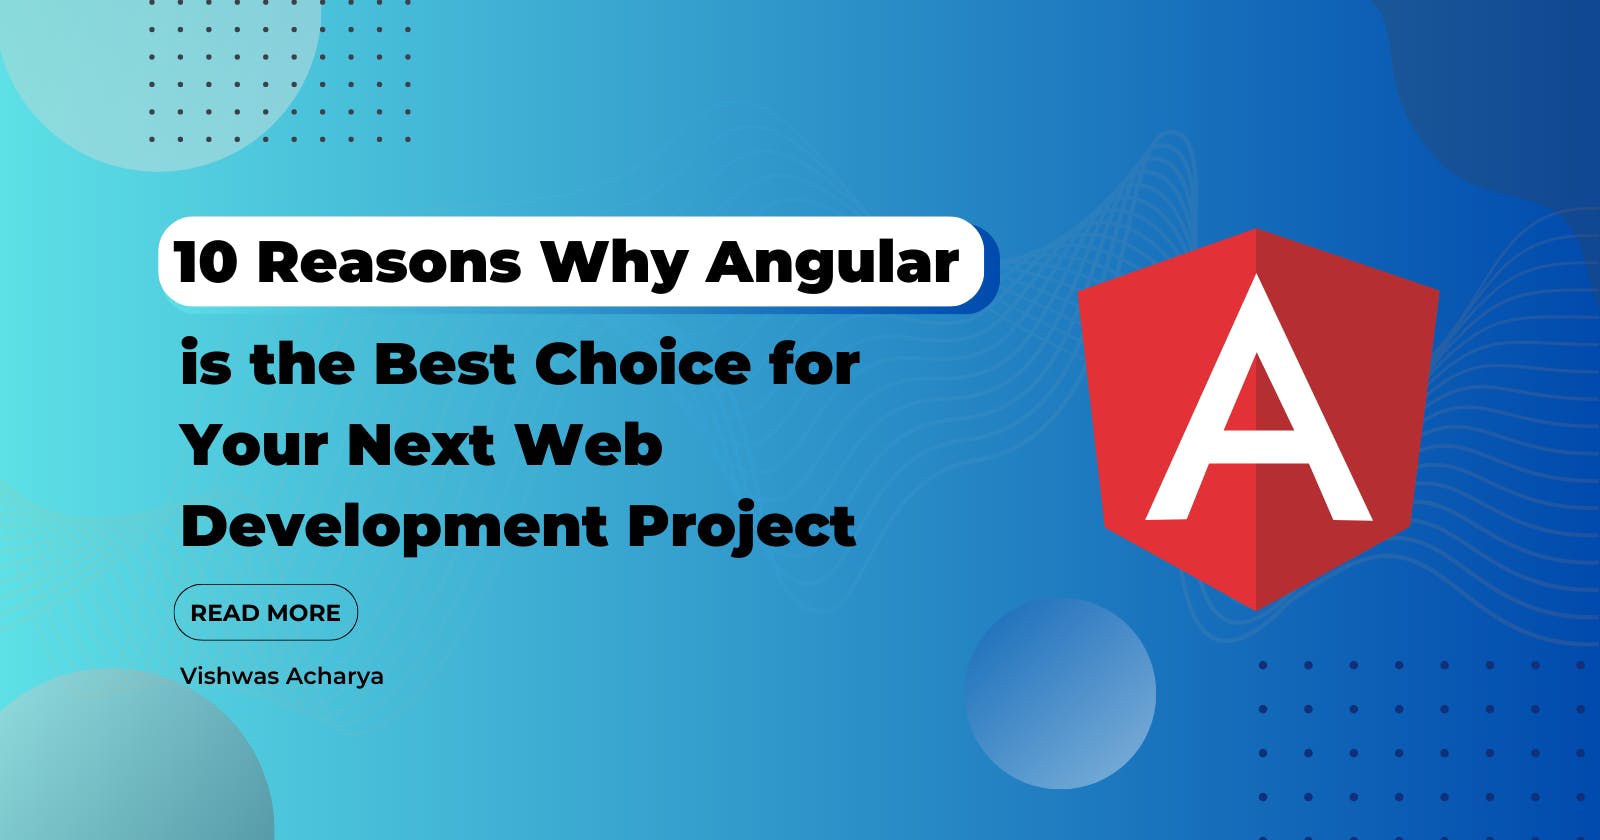 10 Reasons Why Angular is the Best Choice for Your Next Web Development Project